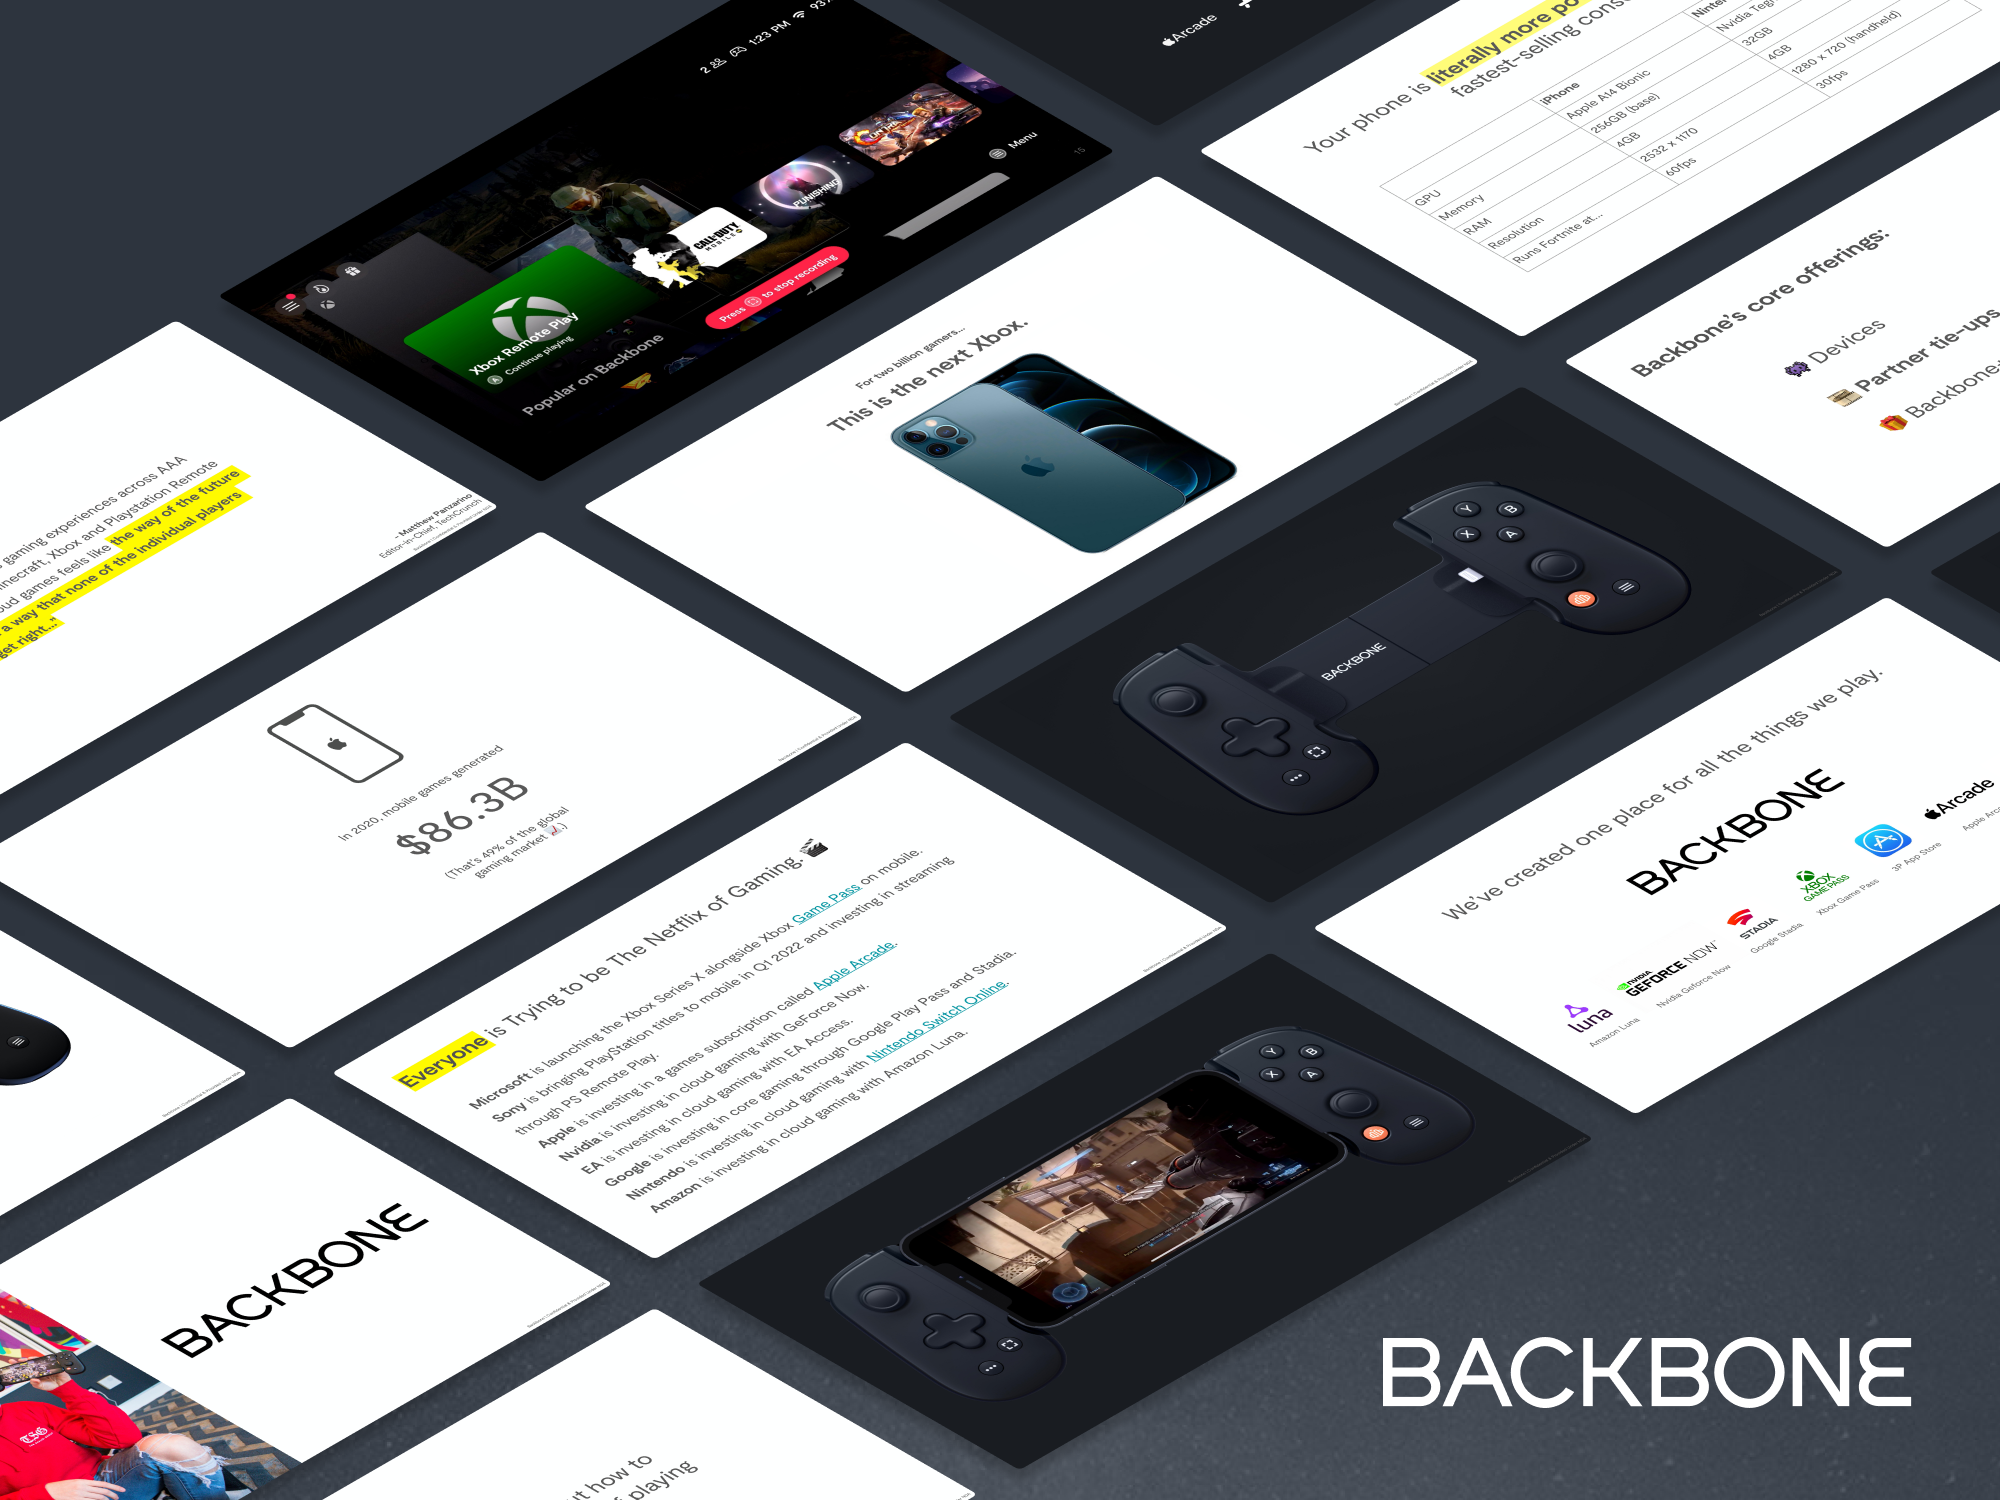 This pitch deck landed $40M for iPhone gaming startup Backbone